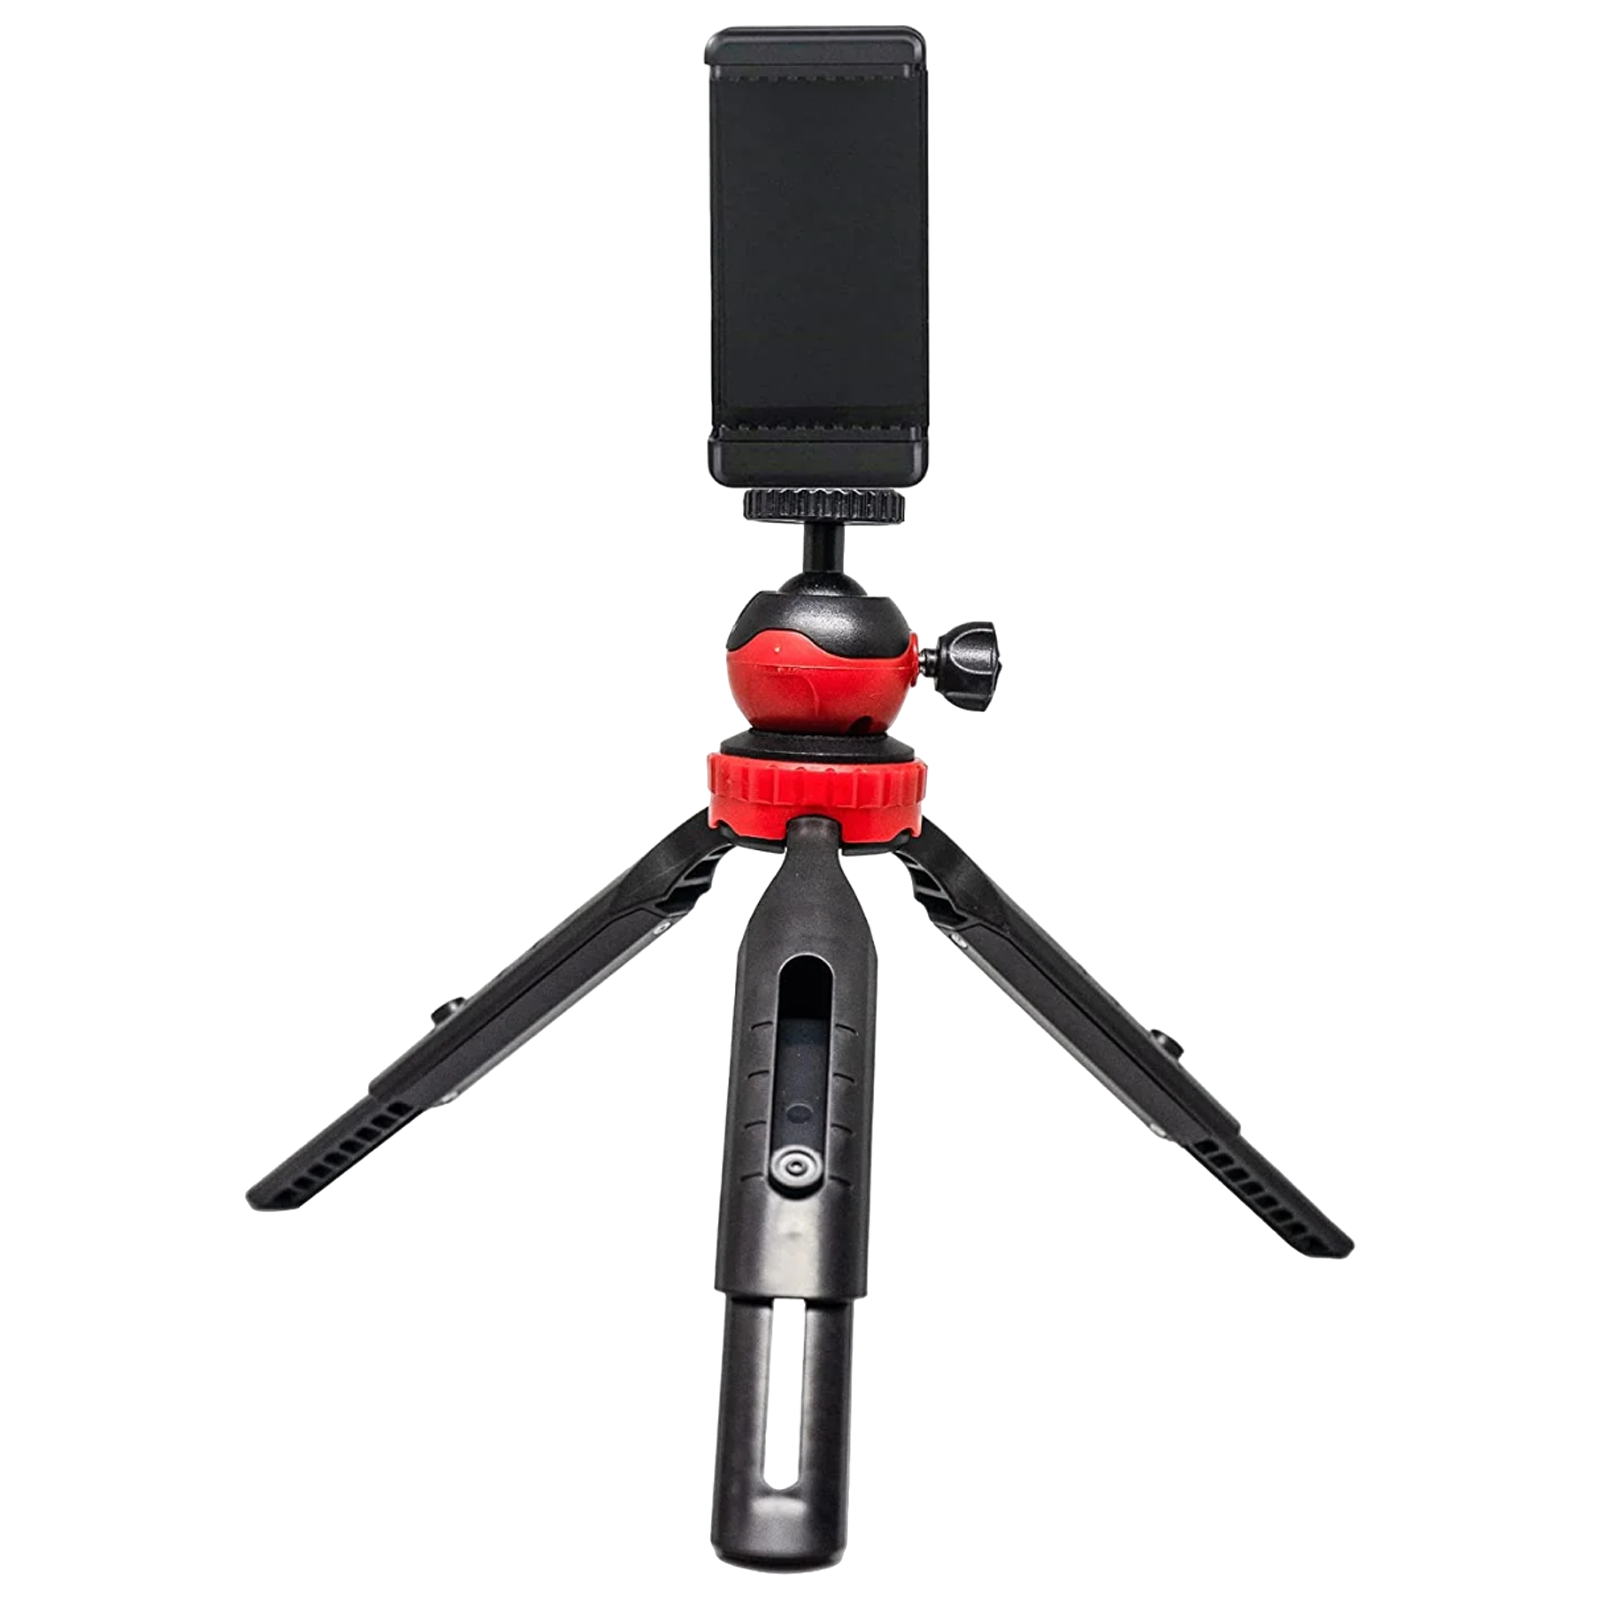 HIFFIN HF-350 18cm Adjustable Tripod for Mobile and Camera (360 Degree Rotatable, Black)